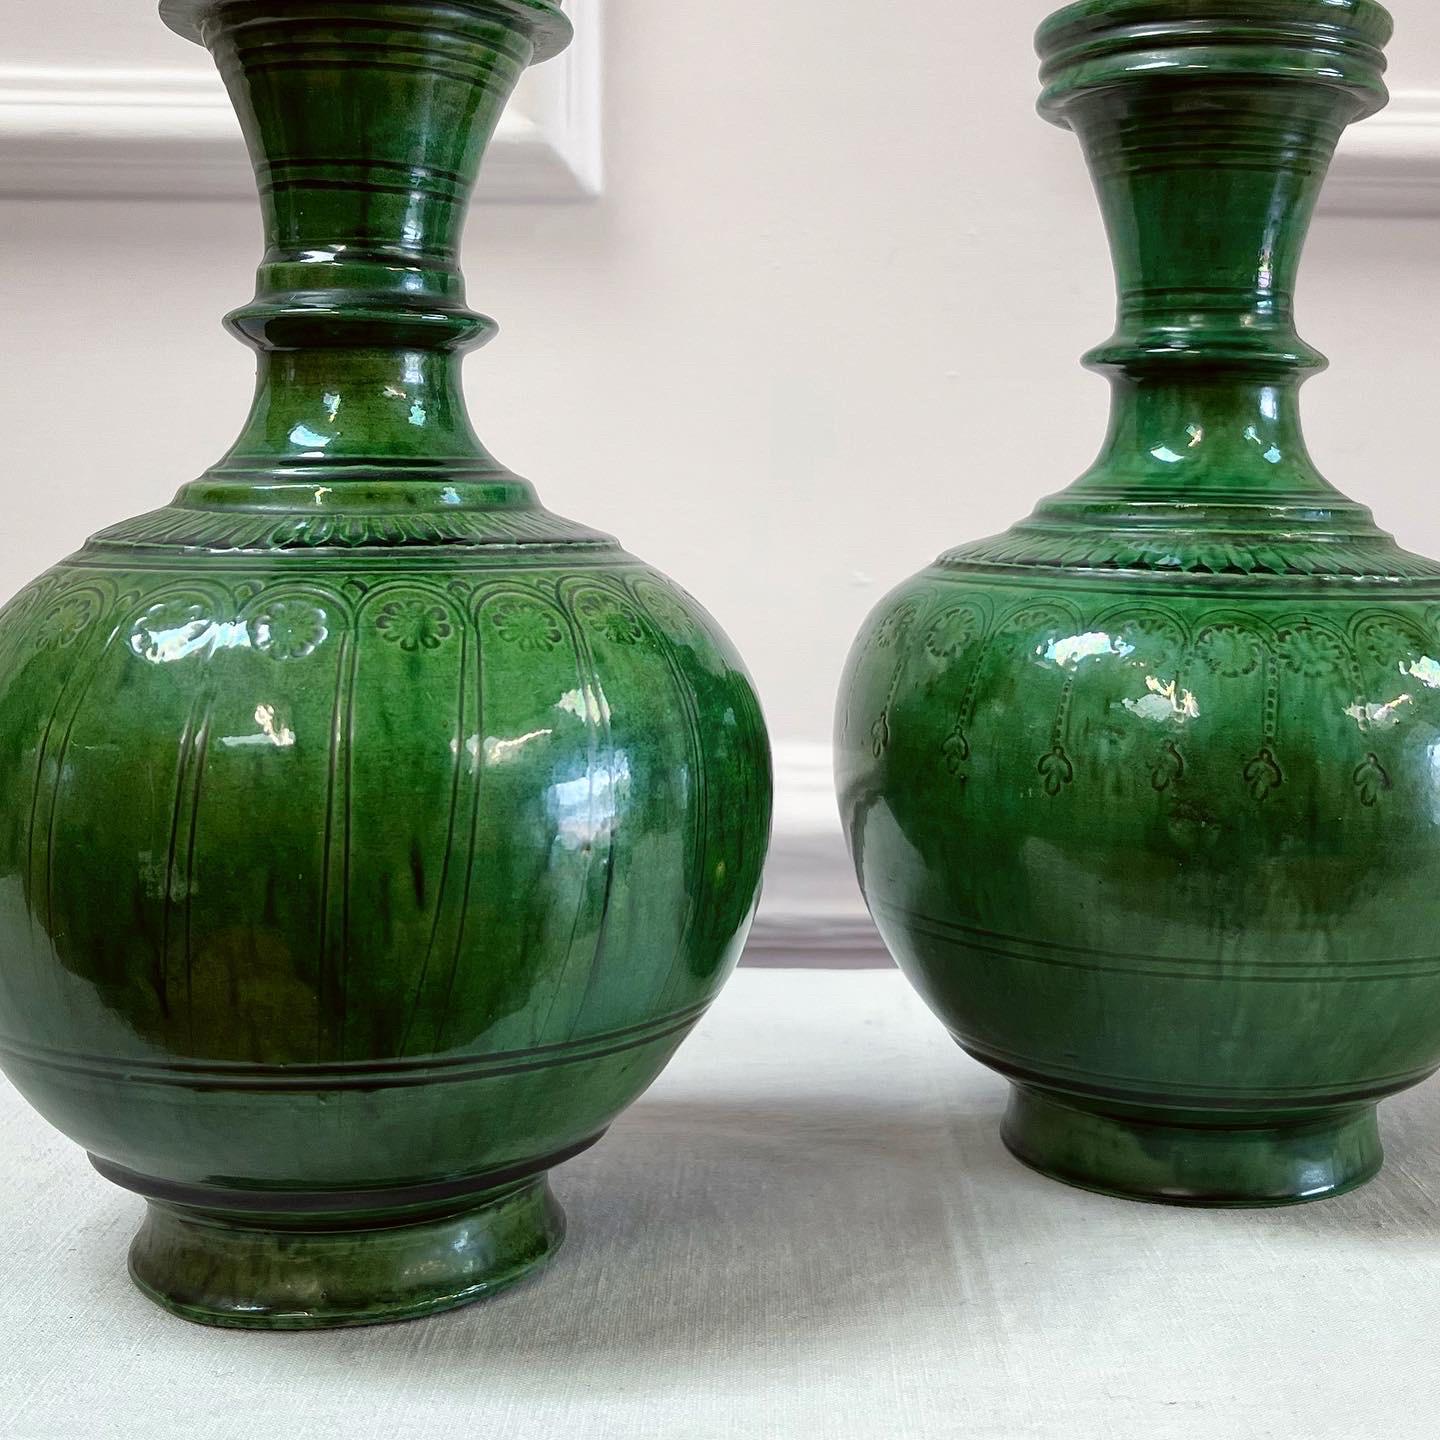 A Pair of Persian Green Glazed Ceramic Lamps In Good Condition For Sale In London, GB